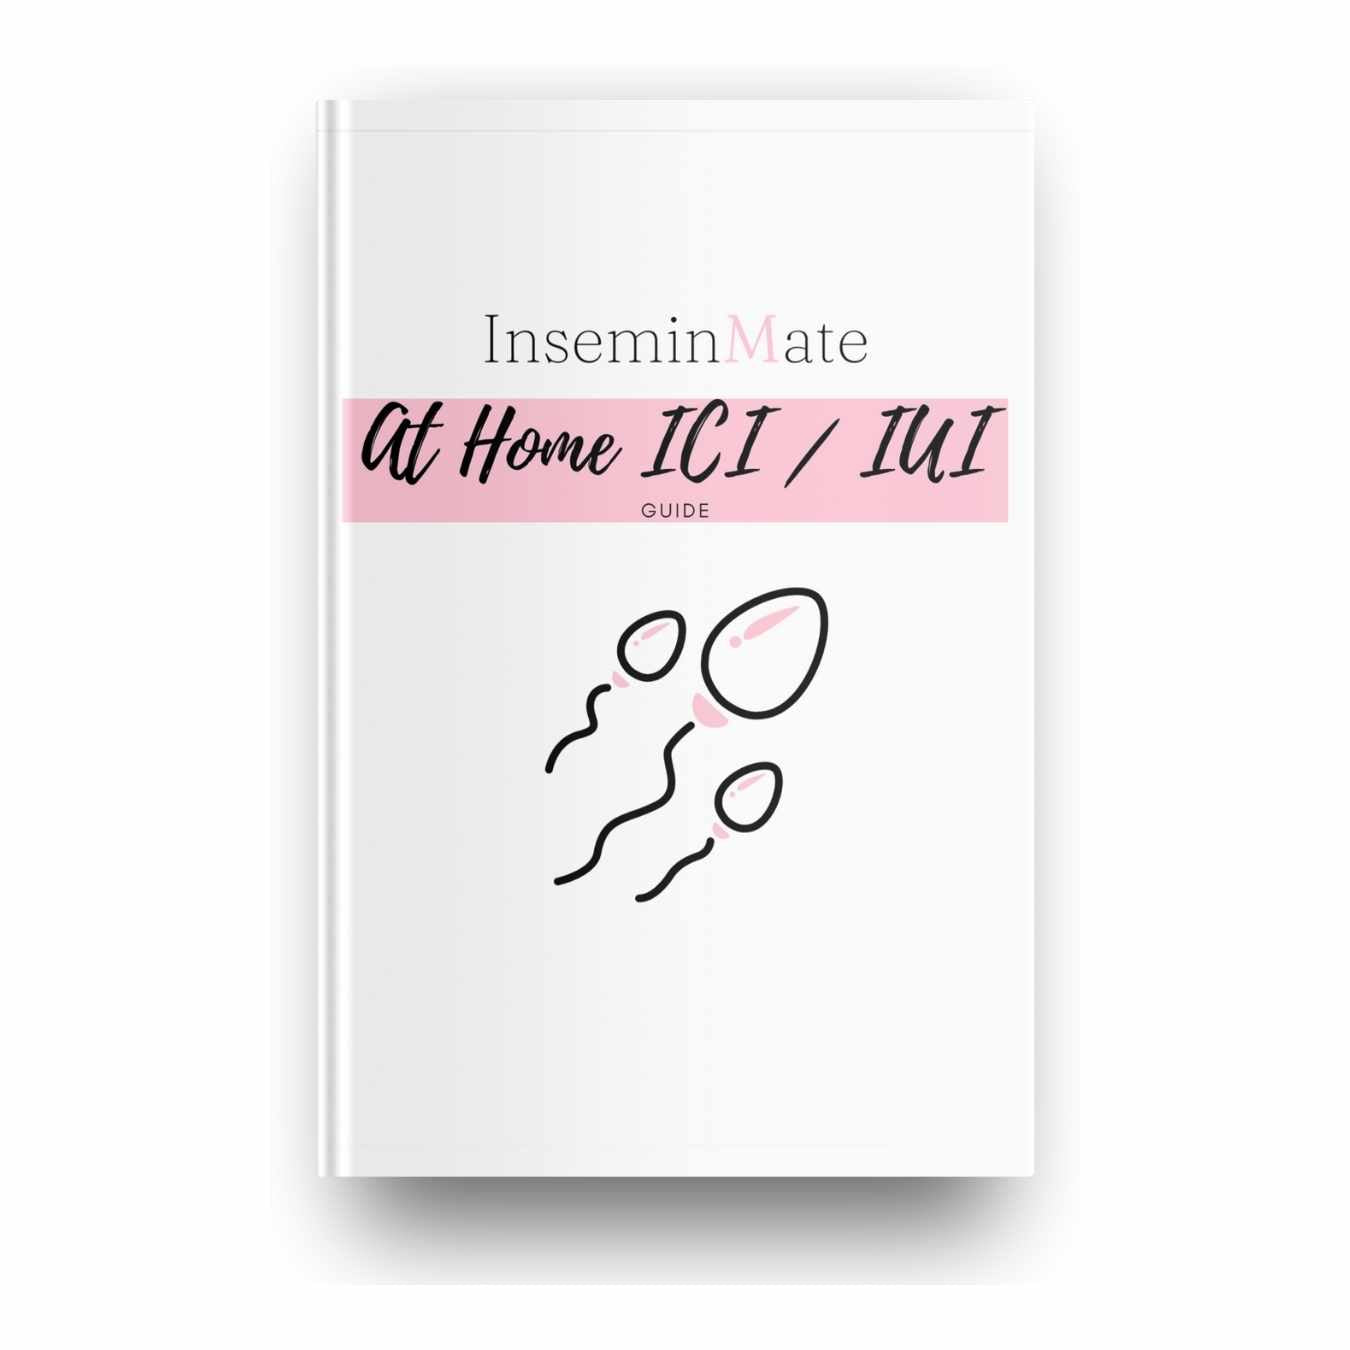 Guide on how to peform IUI or ICI